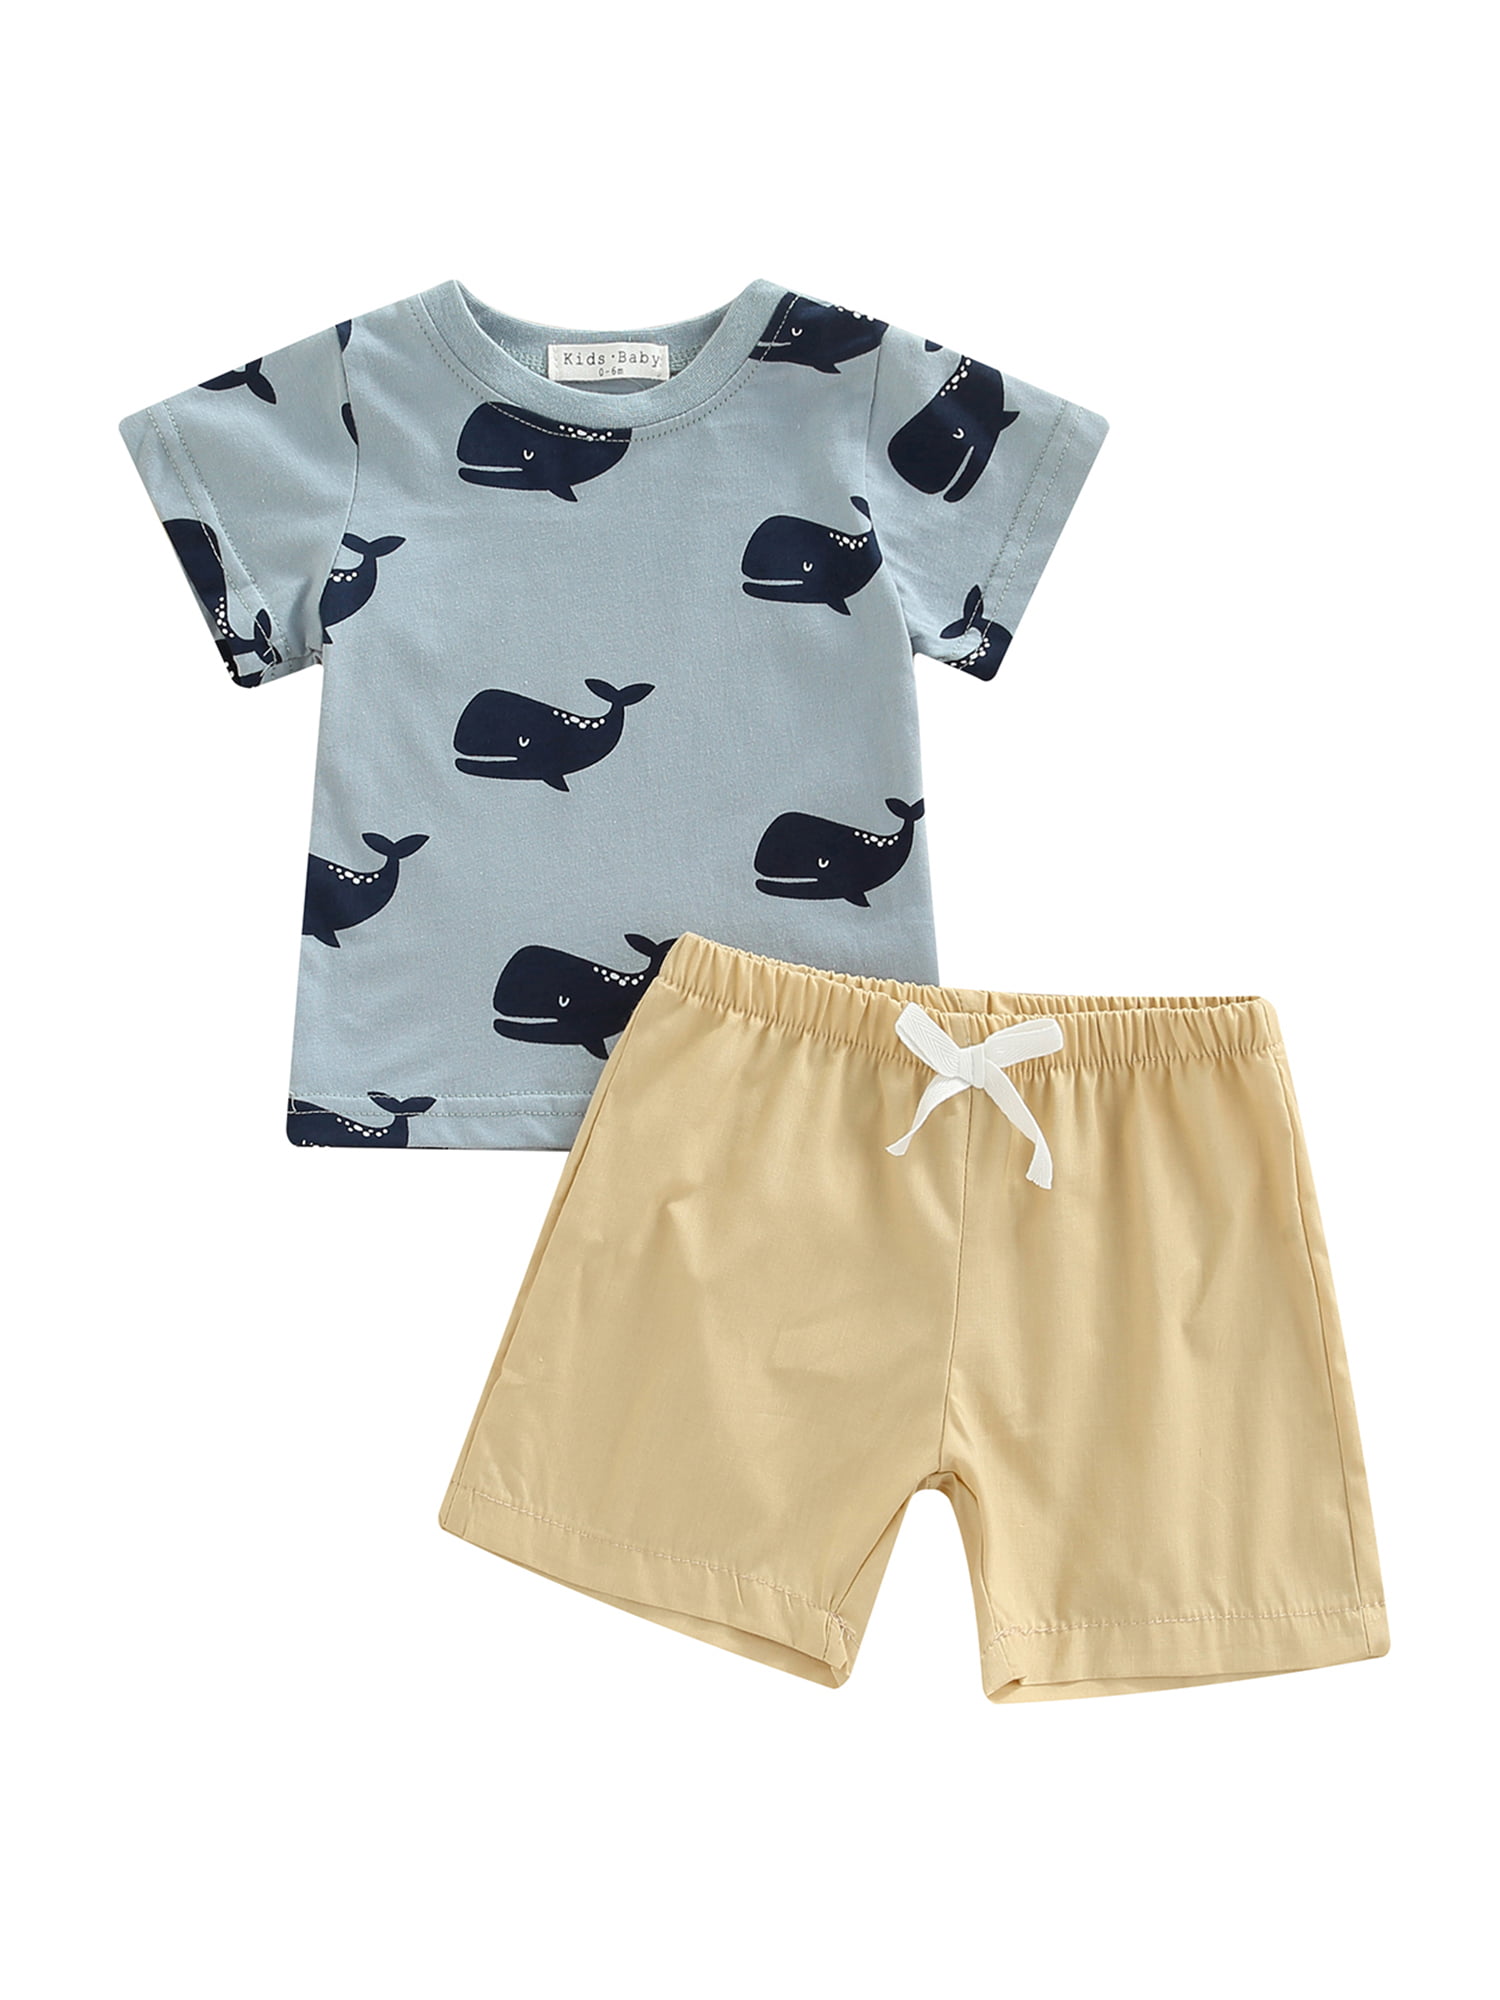 Solid Shorts Outfit T Toddler Baby Boy Short Sleeve Cartoon Animals Print Shirt 